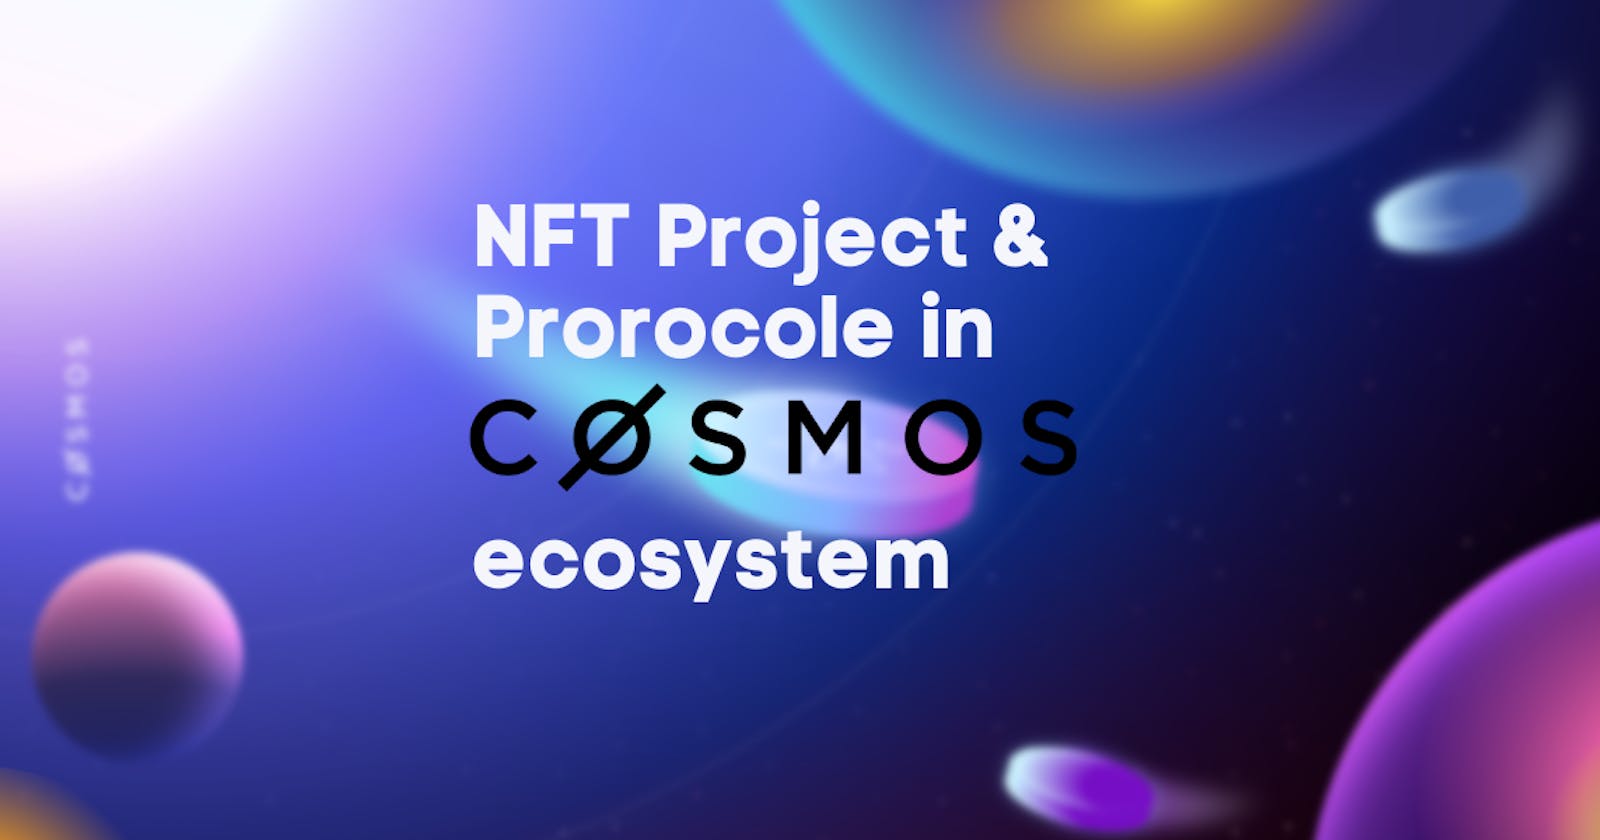 NFT Projects & Protocols in Cosmos Ecosystem